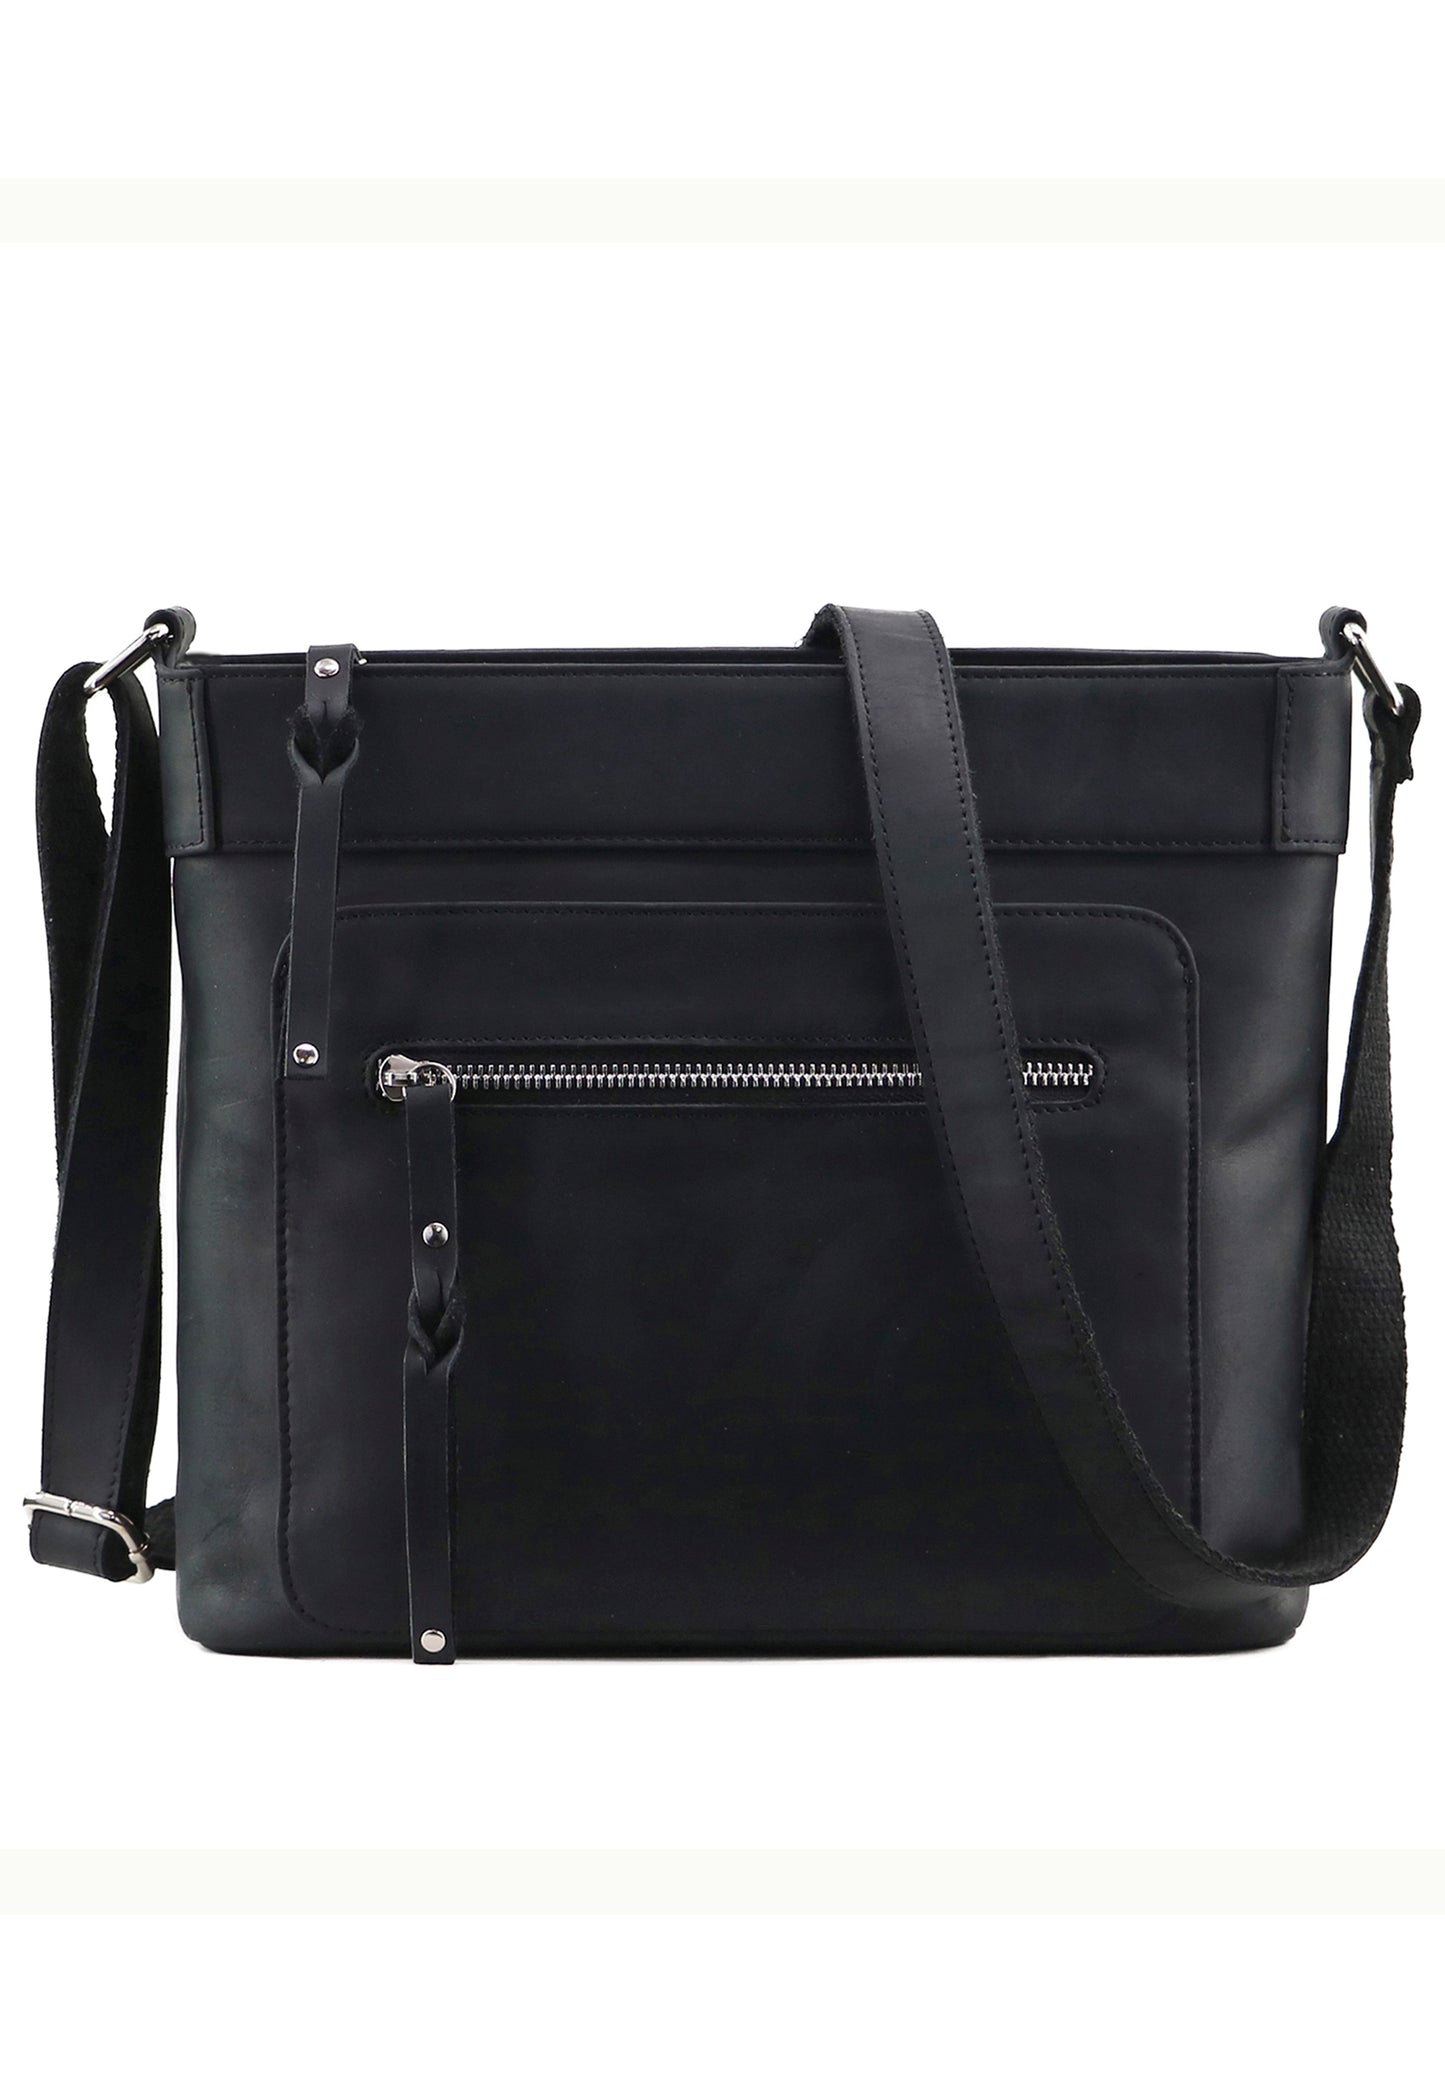 Black leather concealed carry purse